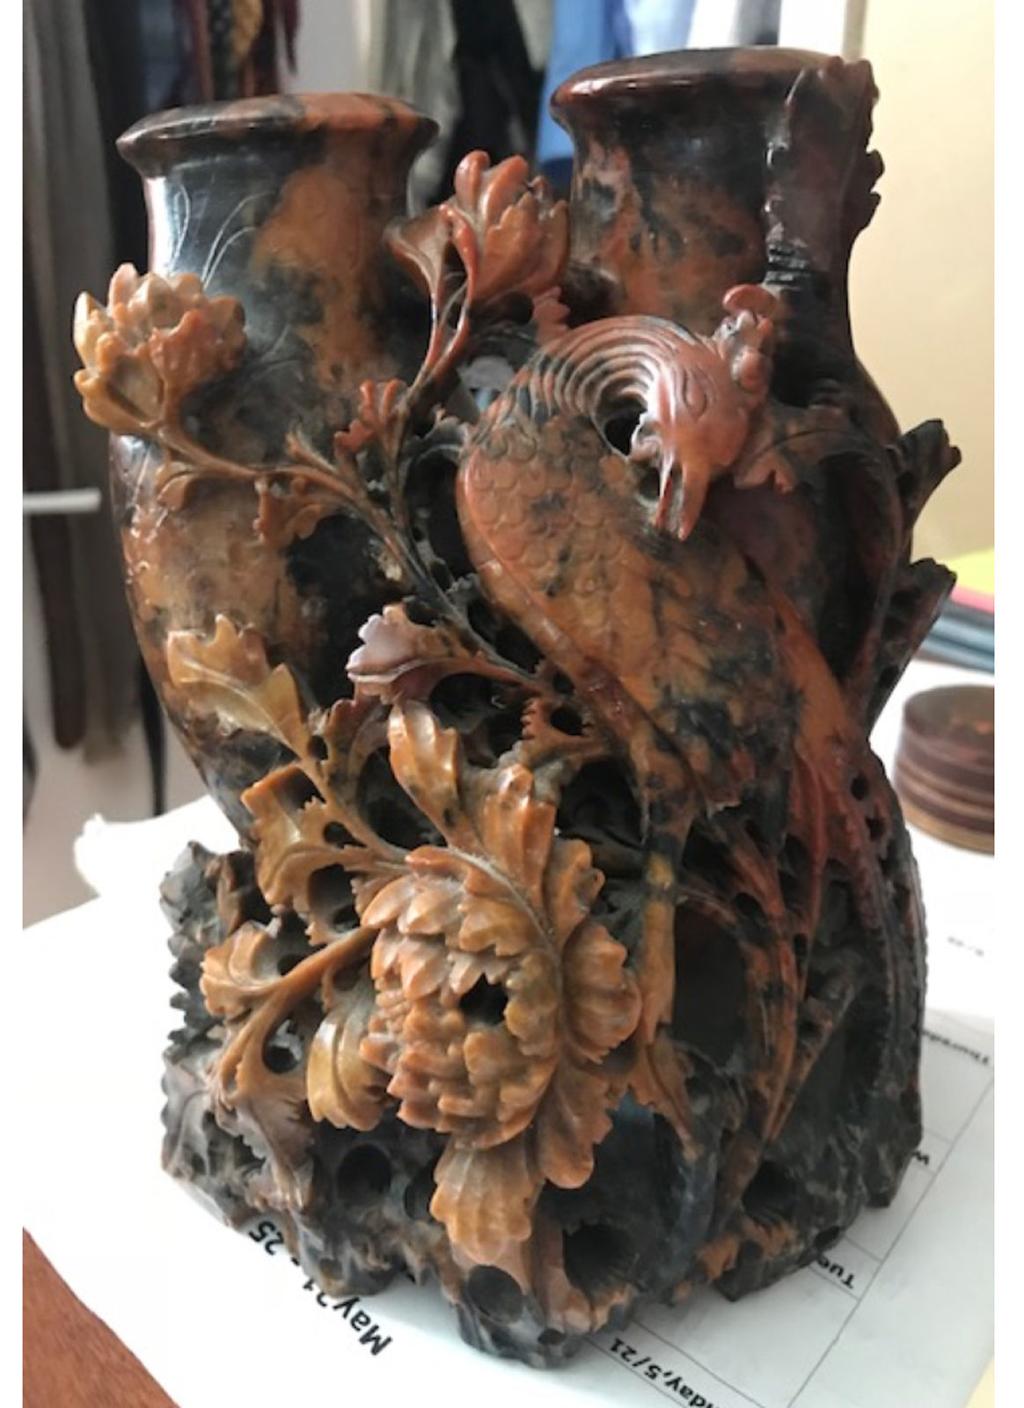 Treasures In Your Attic Chinese Soapstone Carving Is An Attractive Find Lifestyles Lompocrecord Com